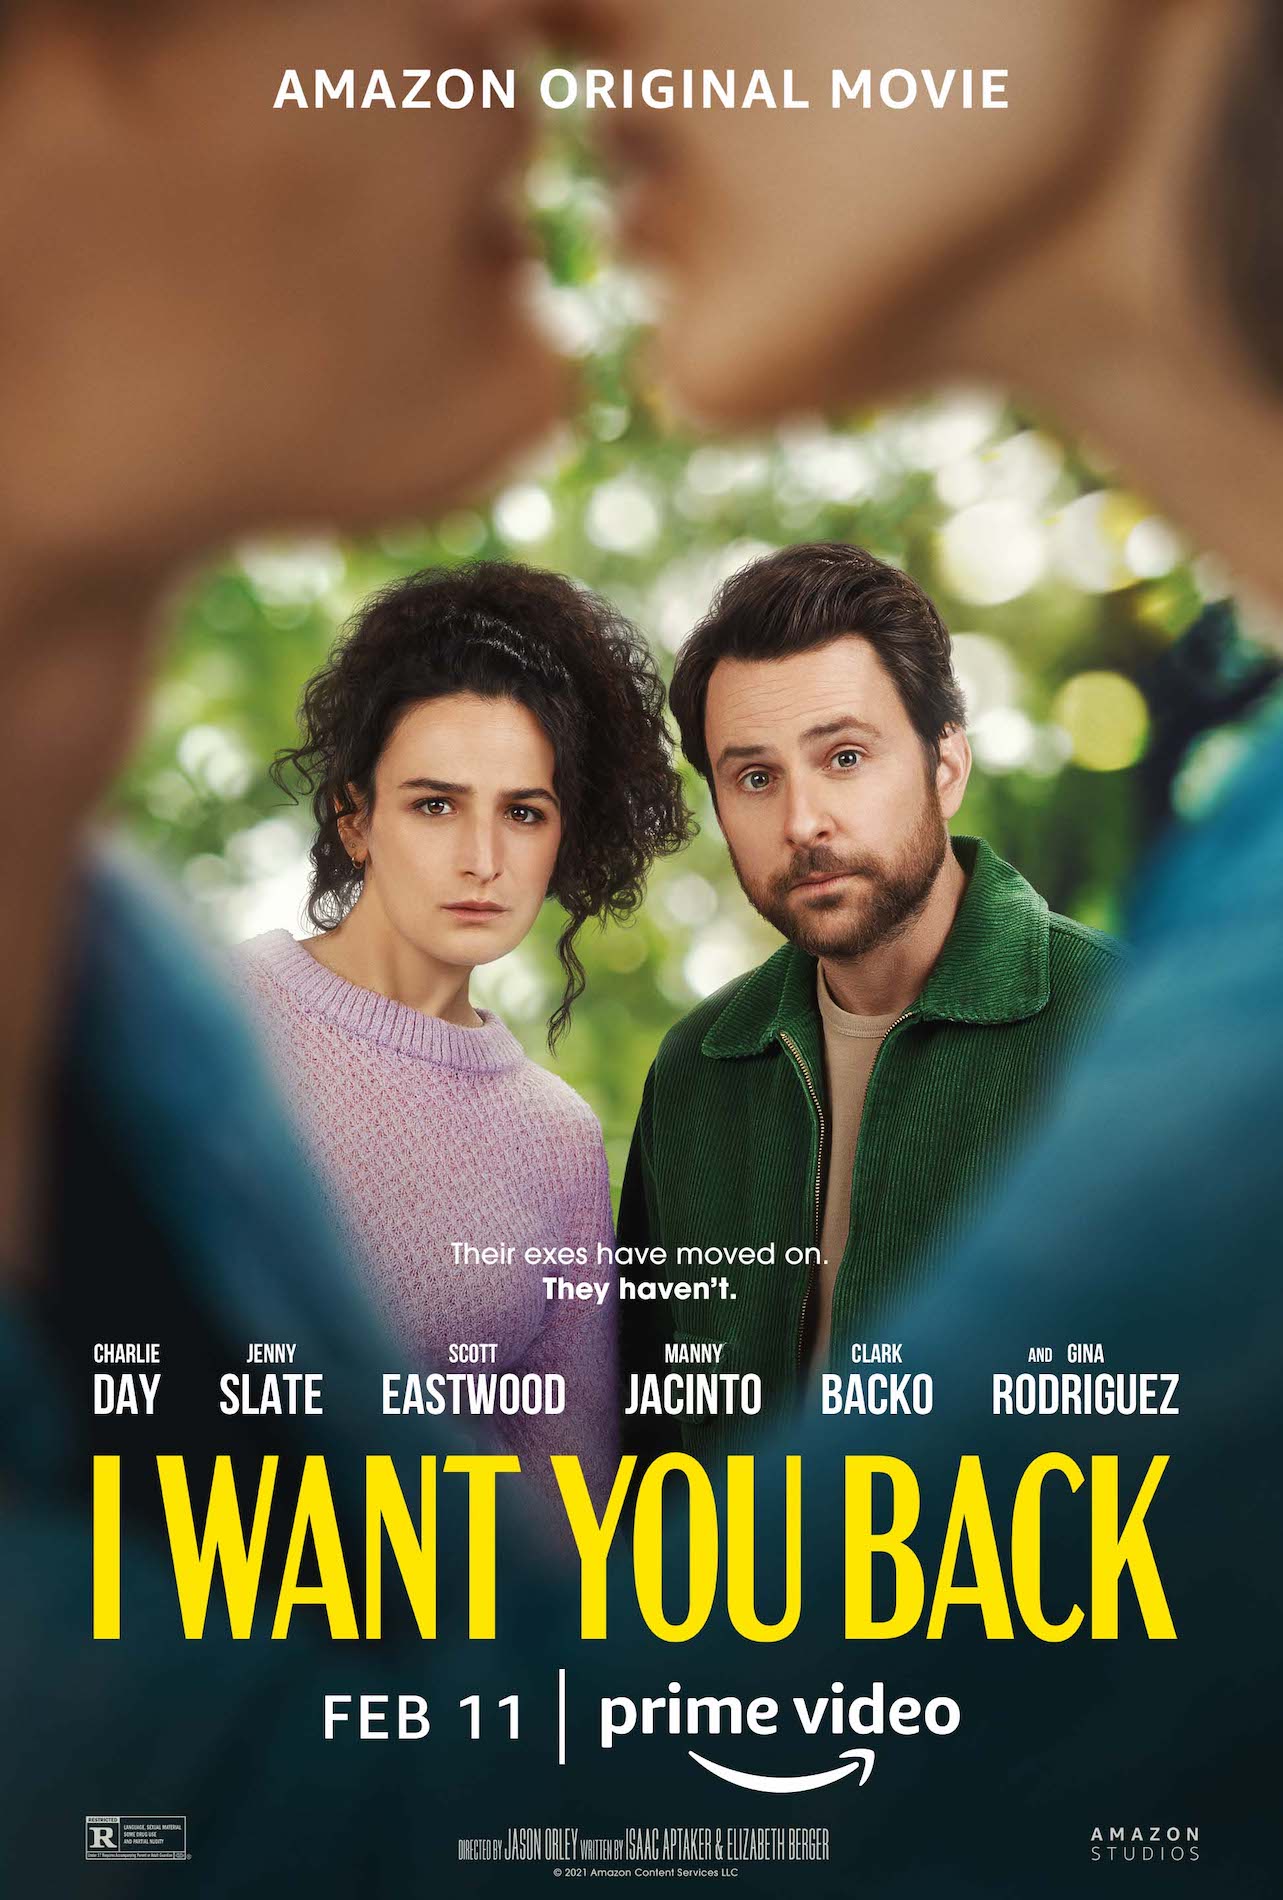 I WANT YOU BACK Amazon Prime poster